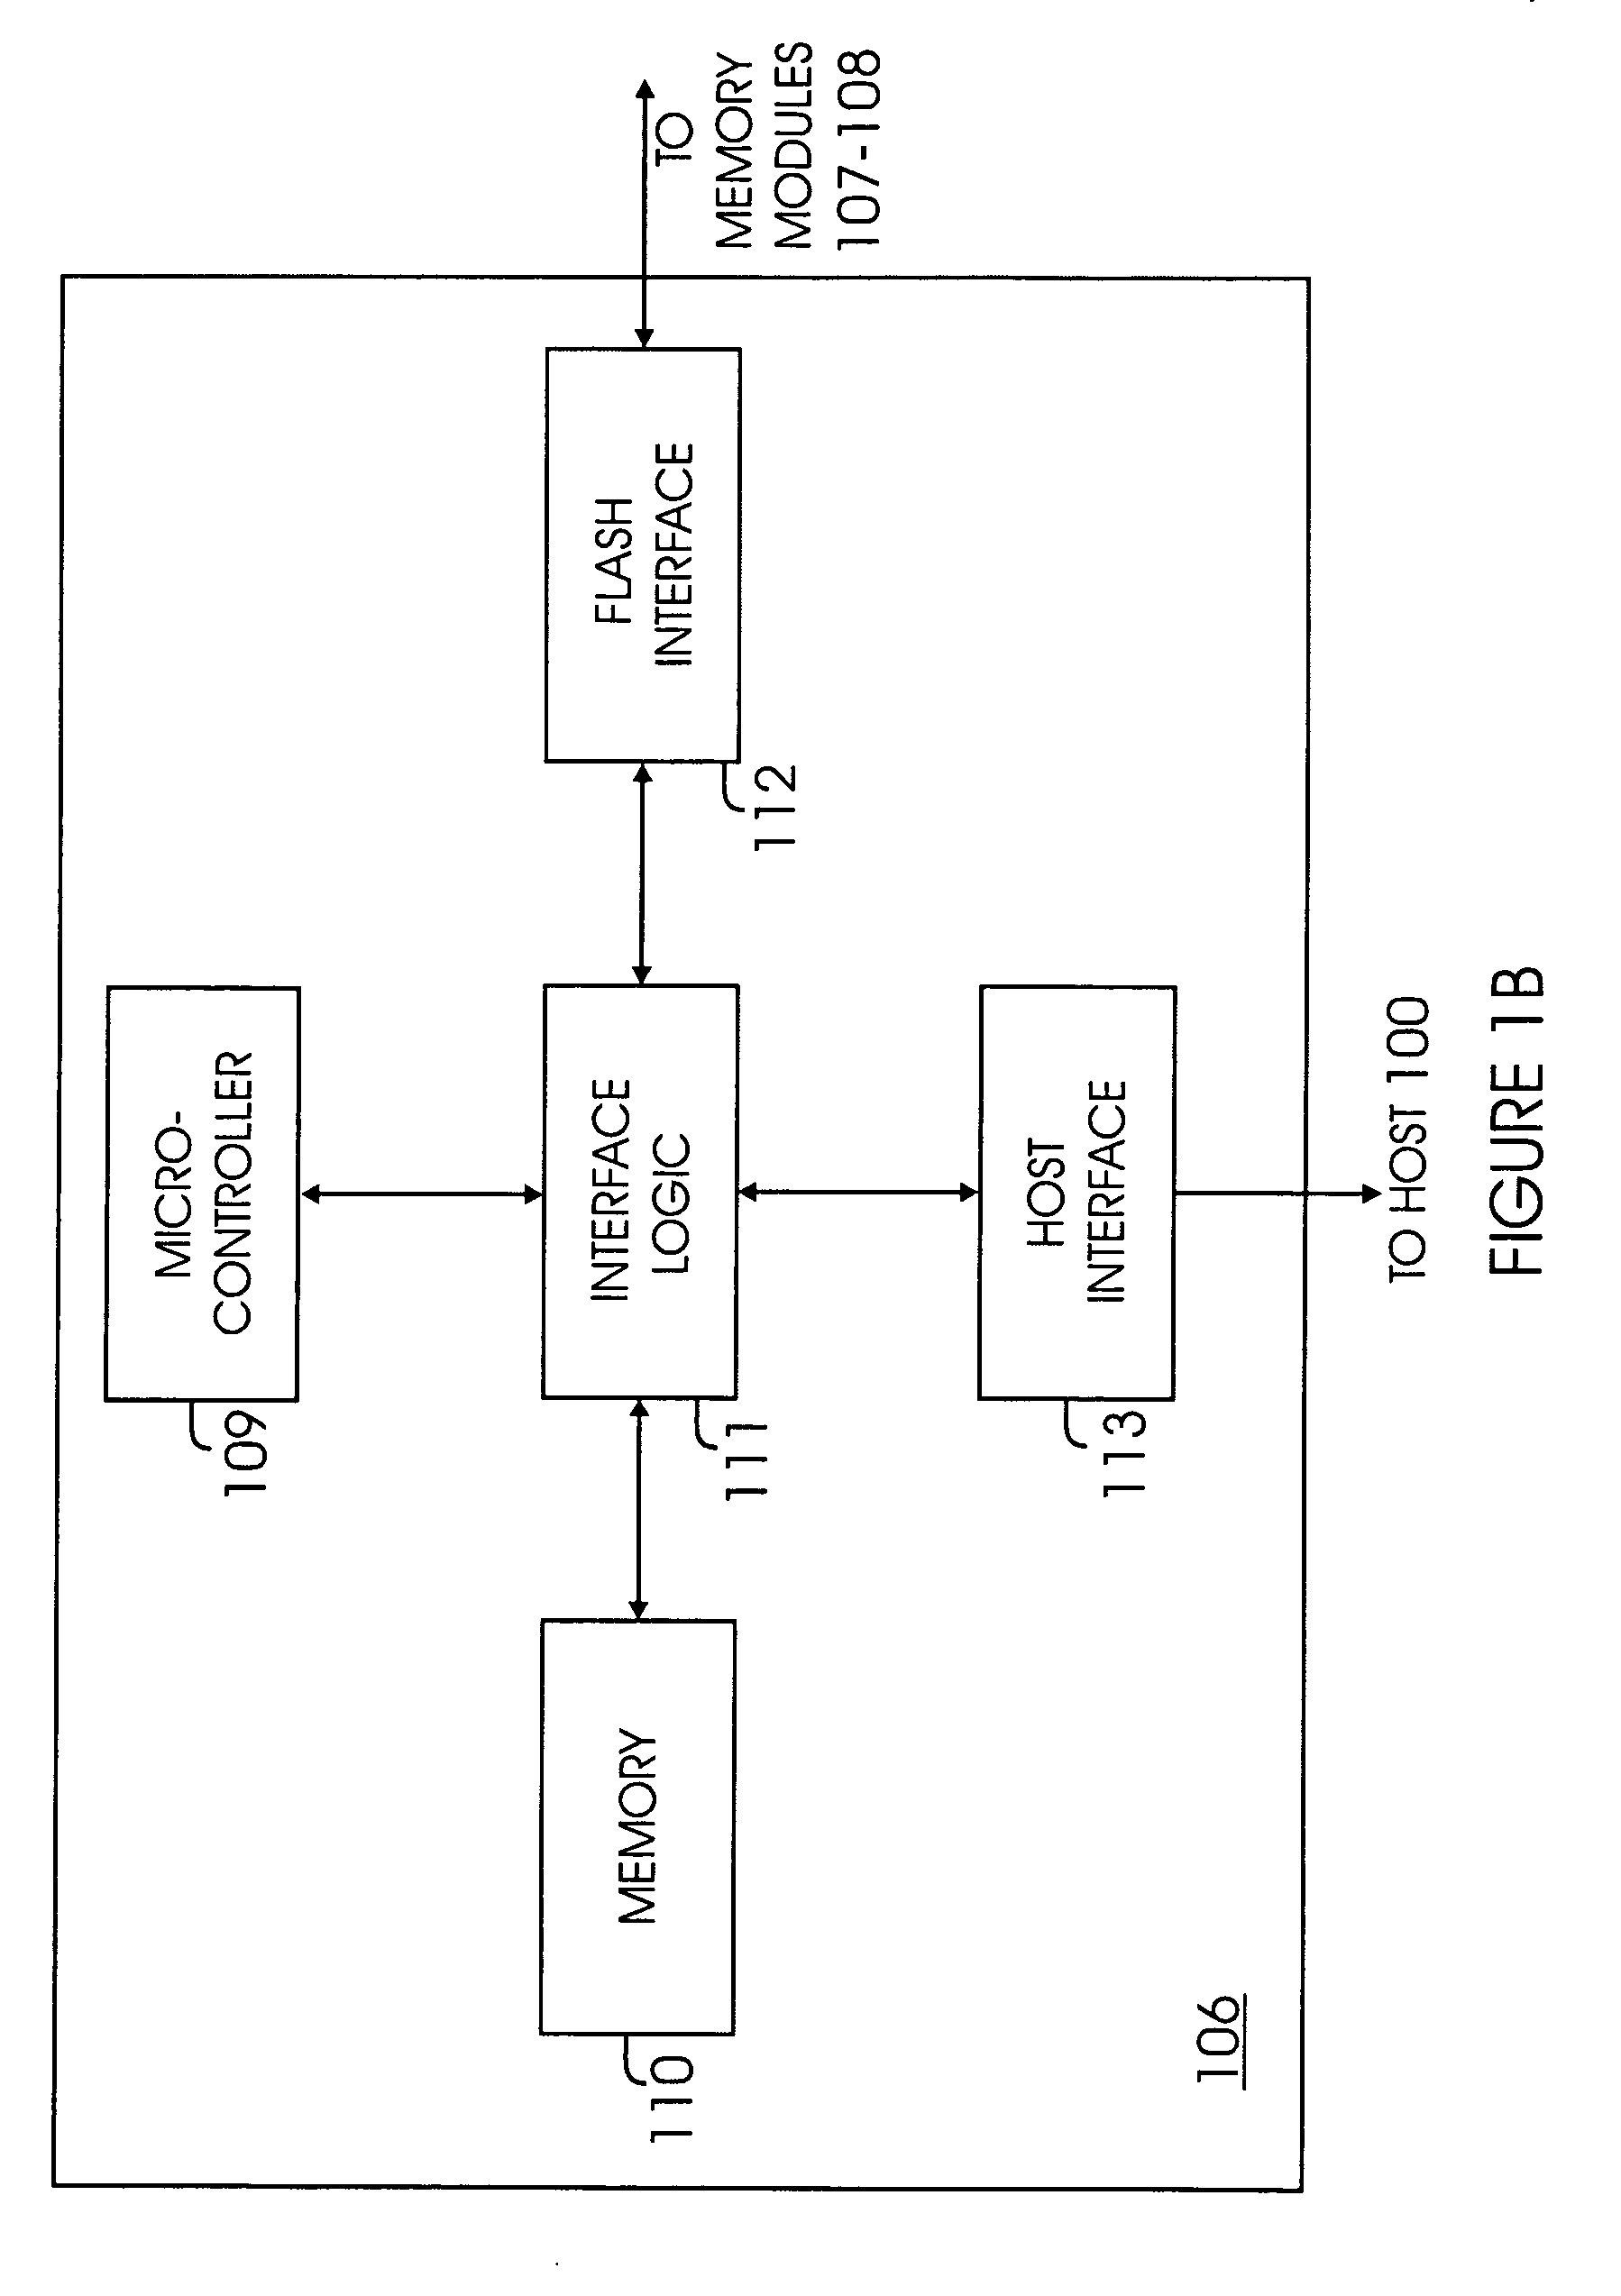 Method and system for accessing non-volatile storage devices